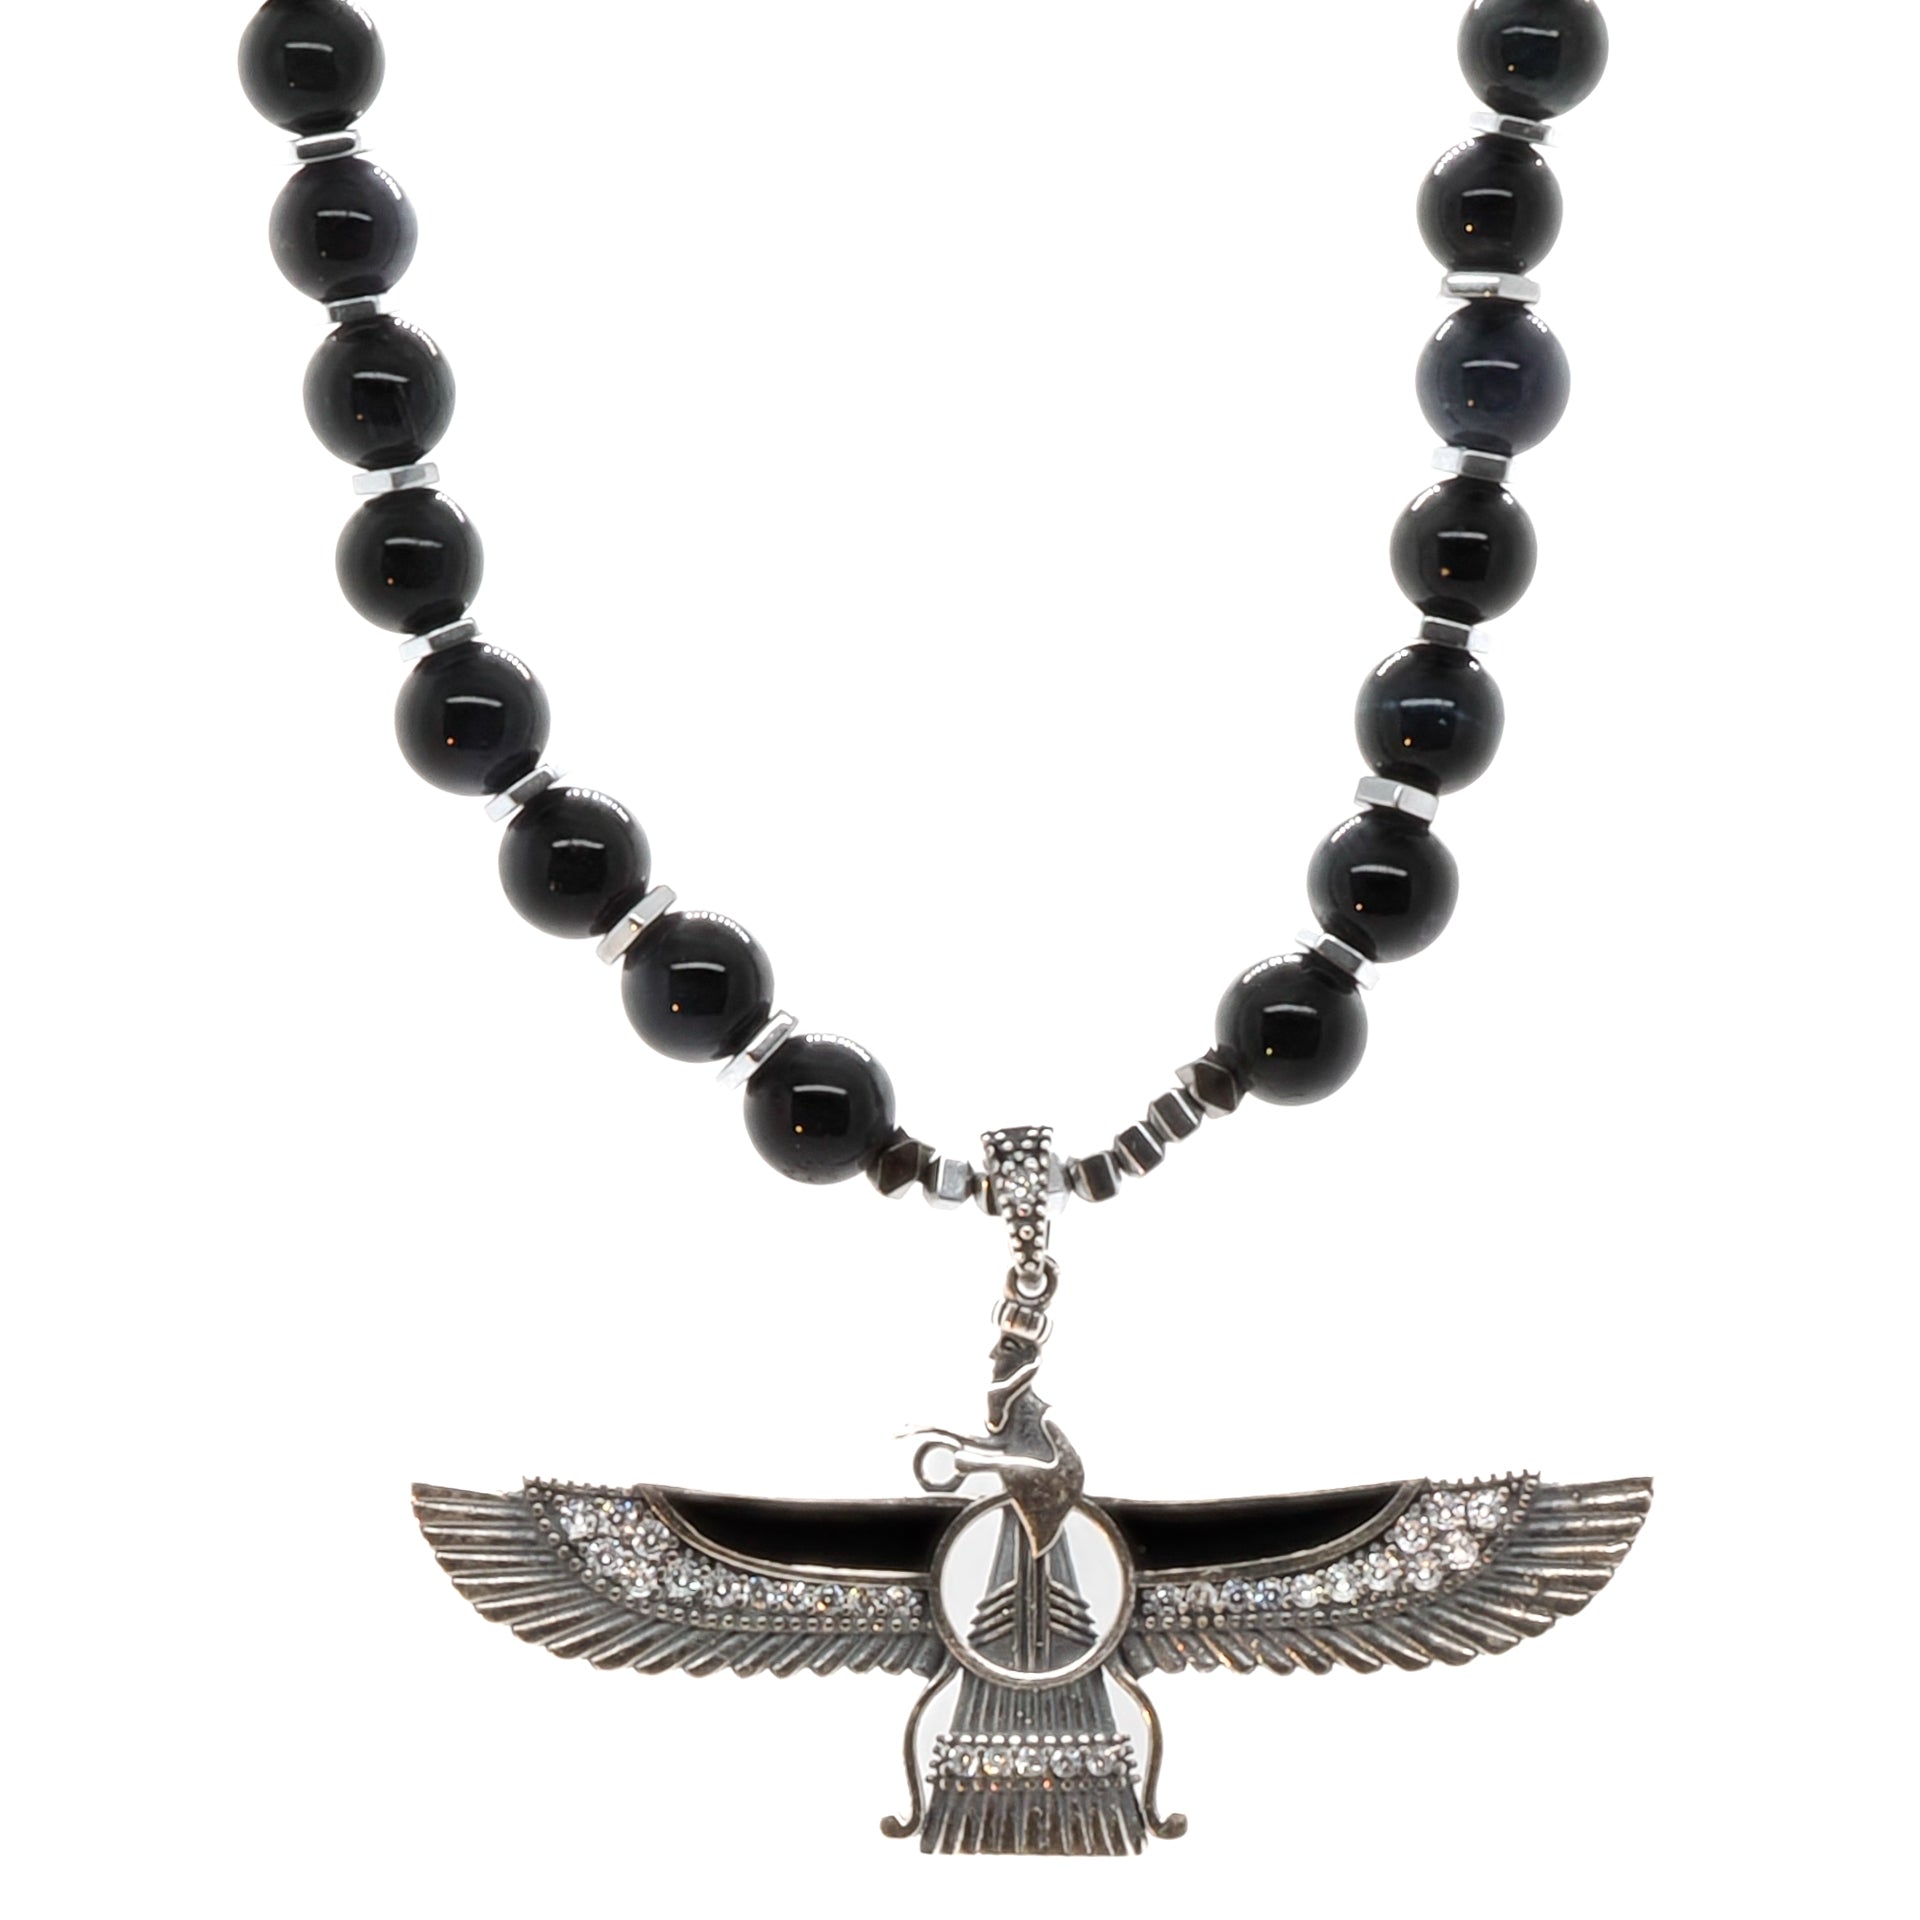 Tourmaline Faravahar Necklace - Handcrafted with Tourmaline Stone Beads and a Sterling Silver Faravahar Pendant.